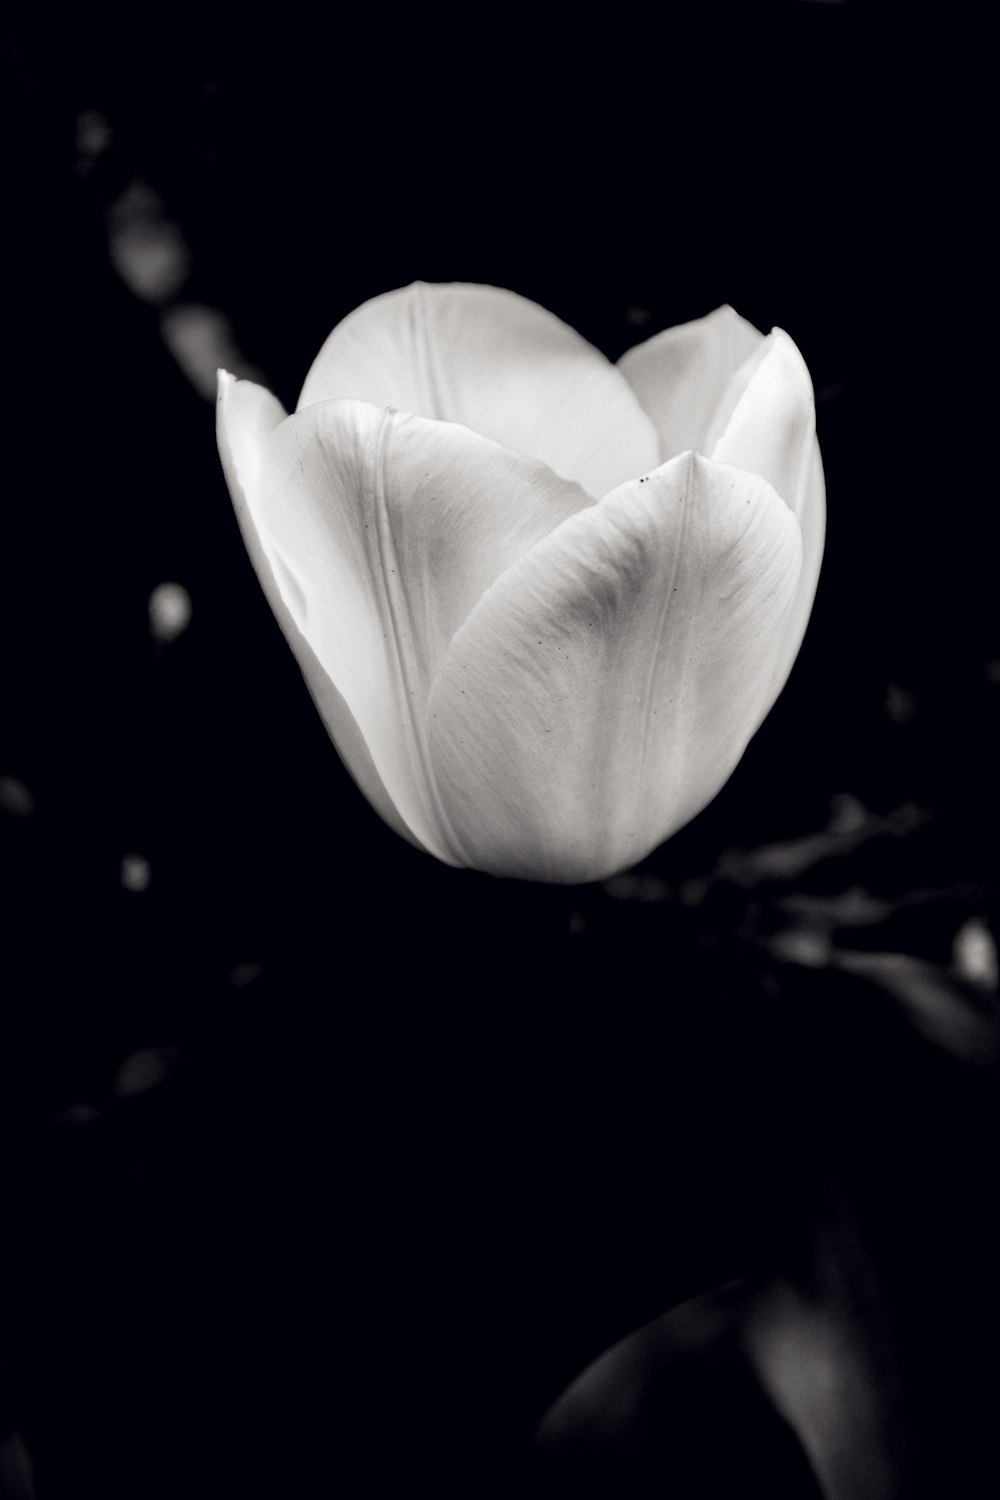 a black and white photo of a tulip